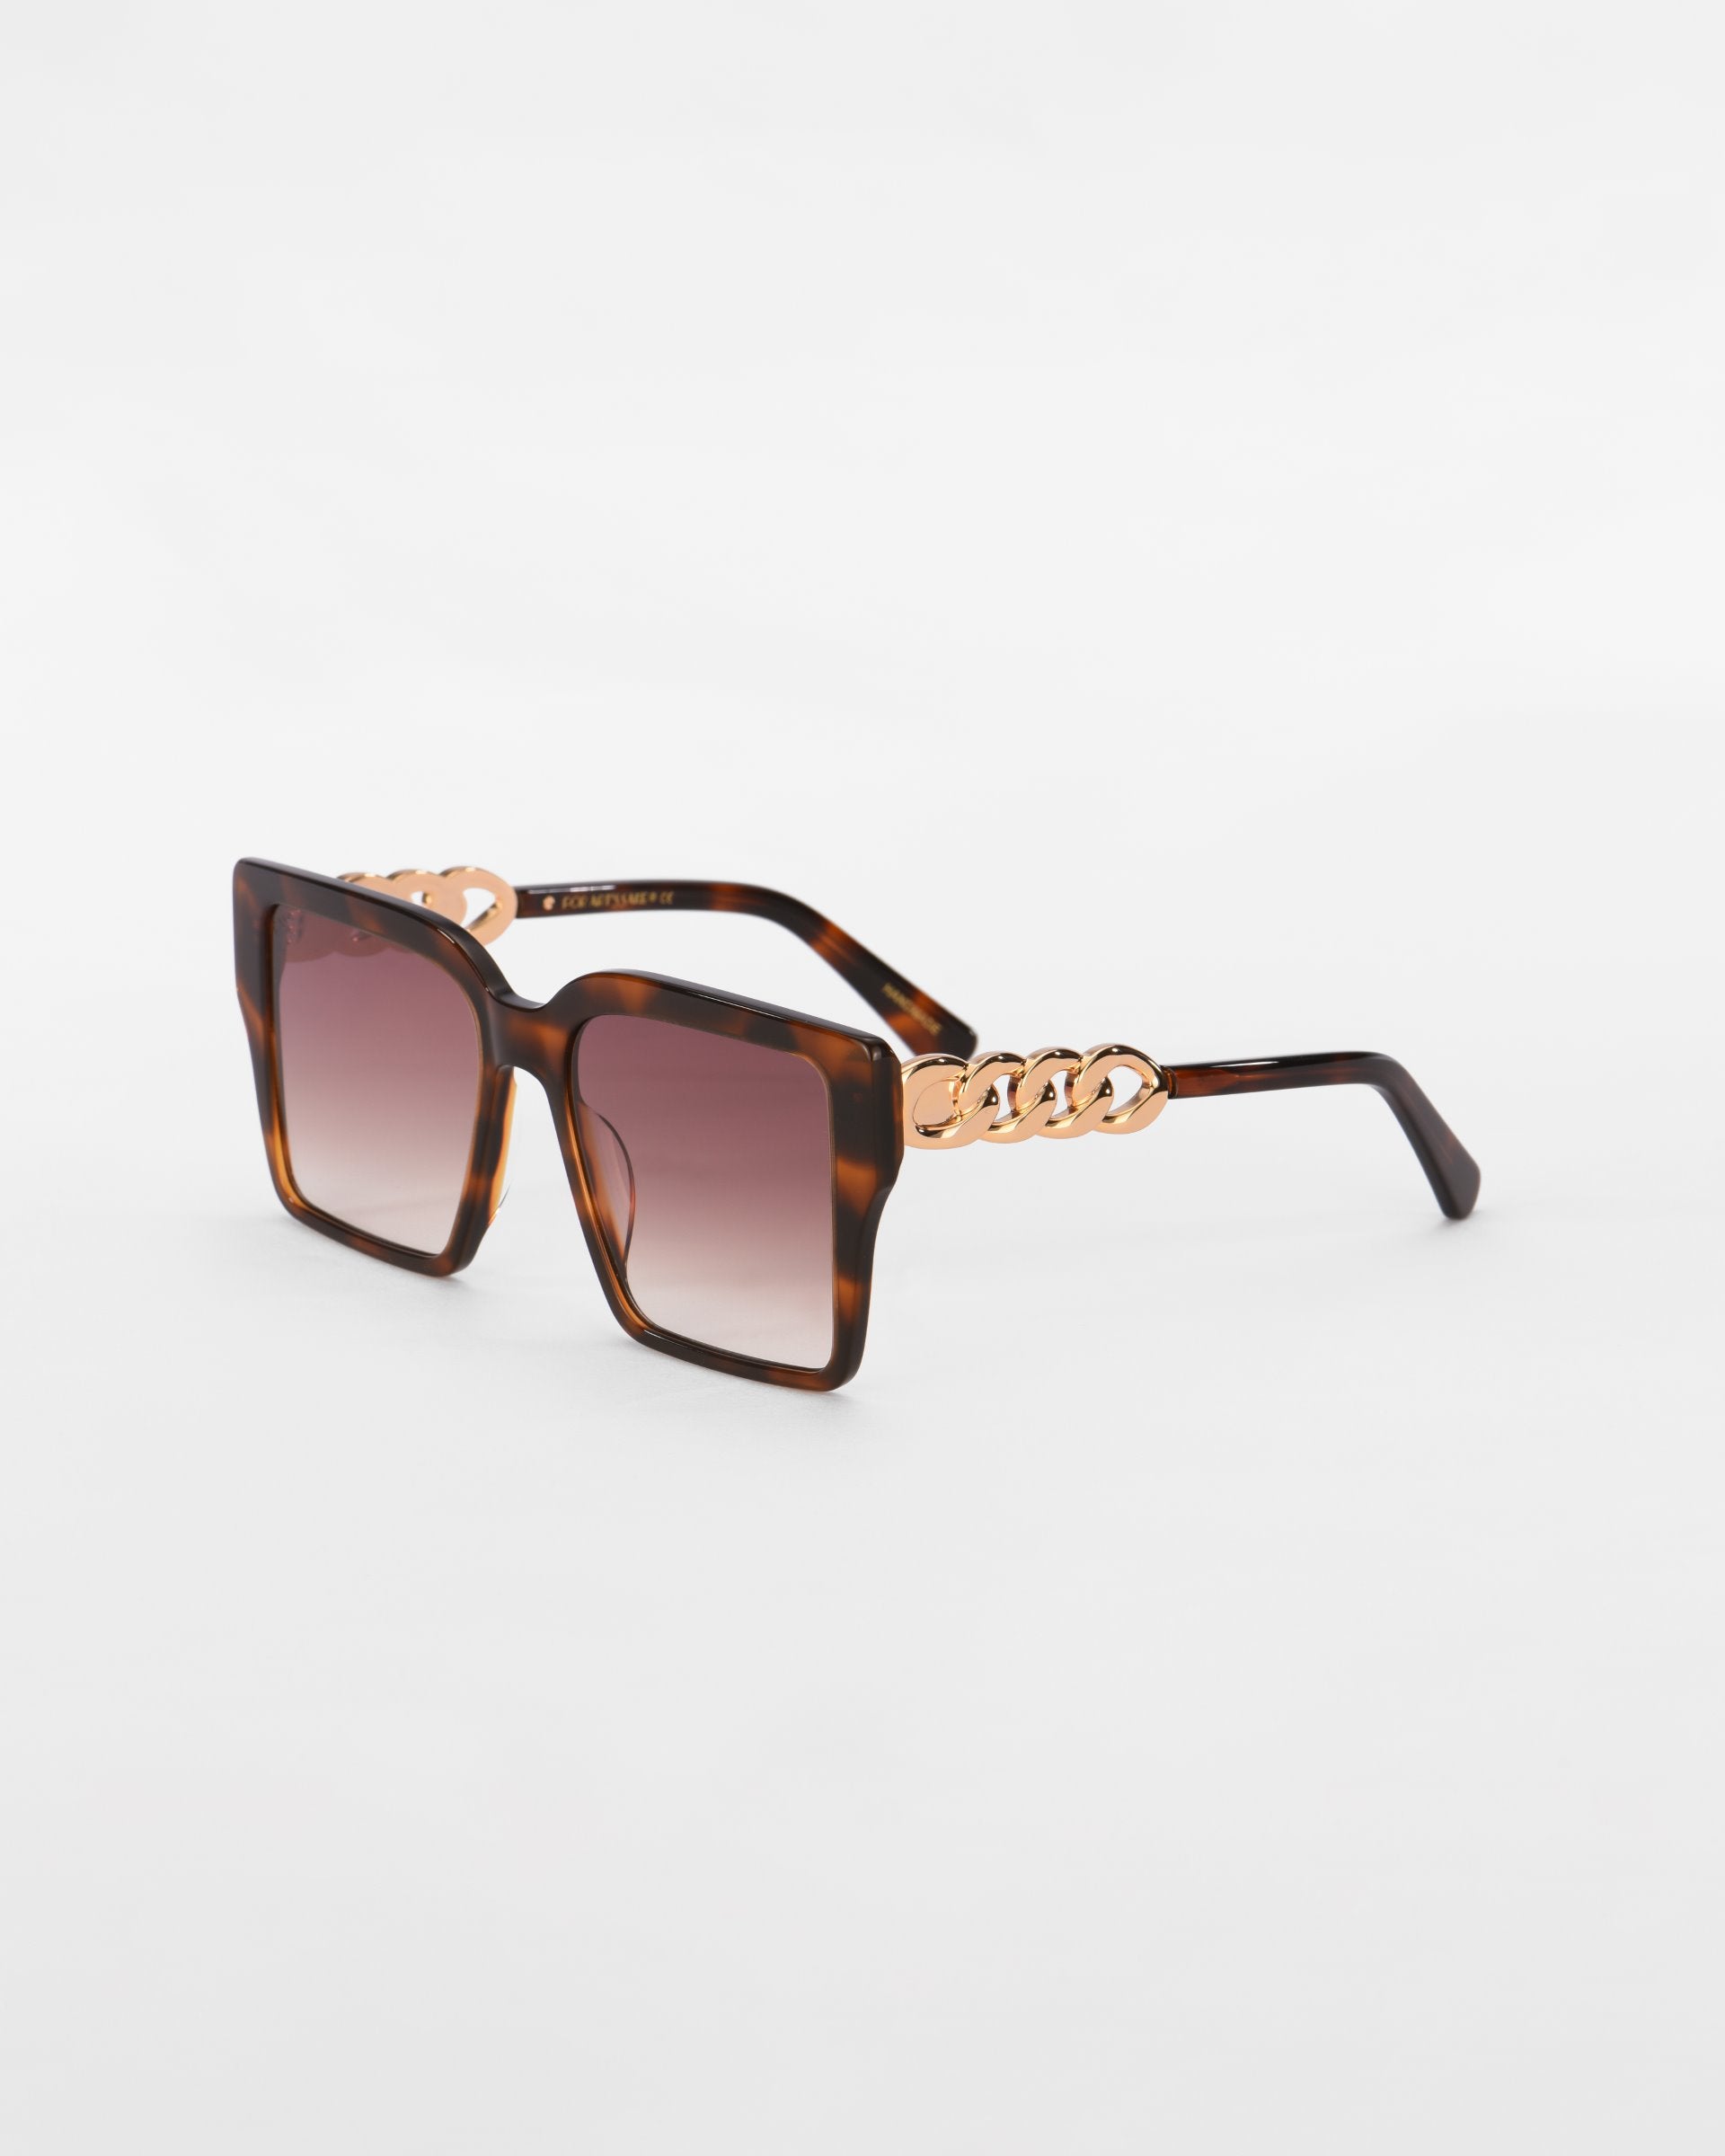 A pair of trendy, oversized square frames with a tortoiseshell finish. The arms showcase luxurious 18-karat gold plated chain-link detailing near the hinges. Ultra-lightweight lenses offer a gradient from dark to light. The white background emphasizes the stylish design of the Castle by For Art&#39;s Sake®.